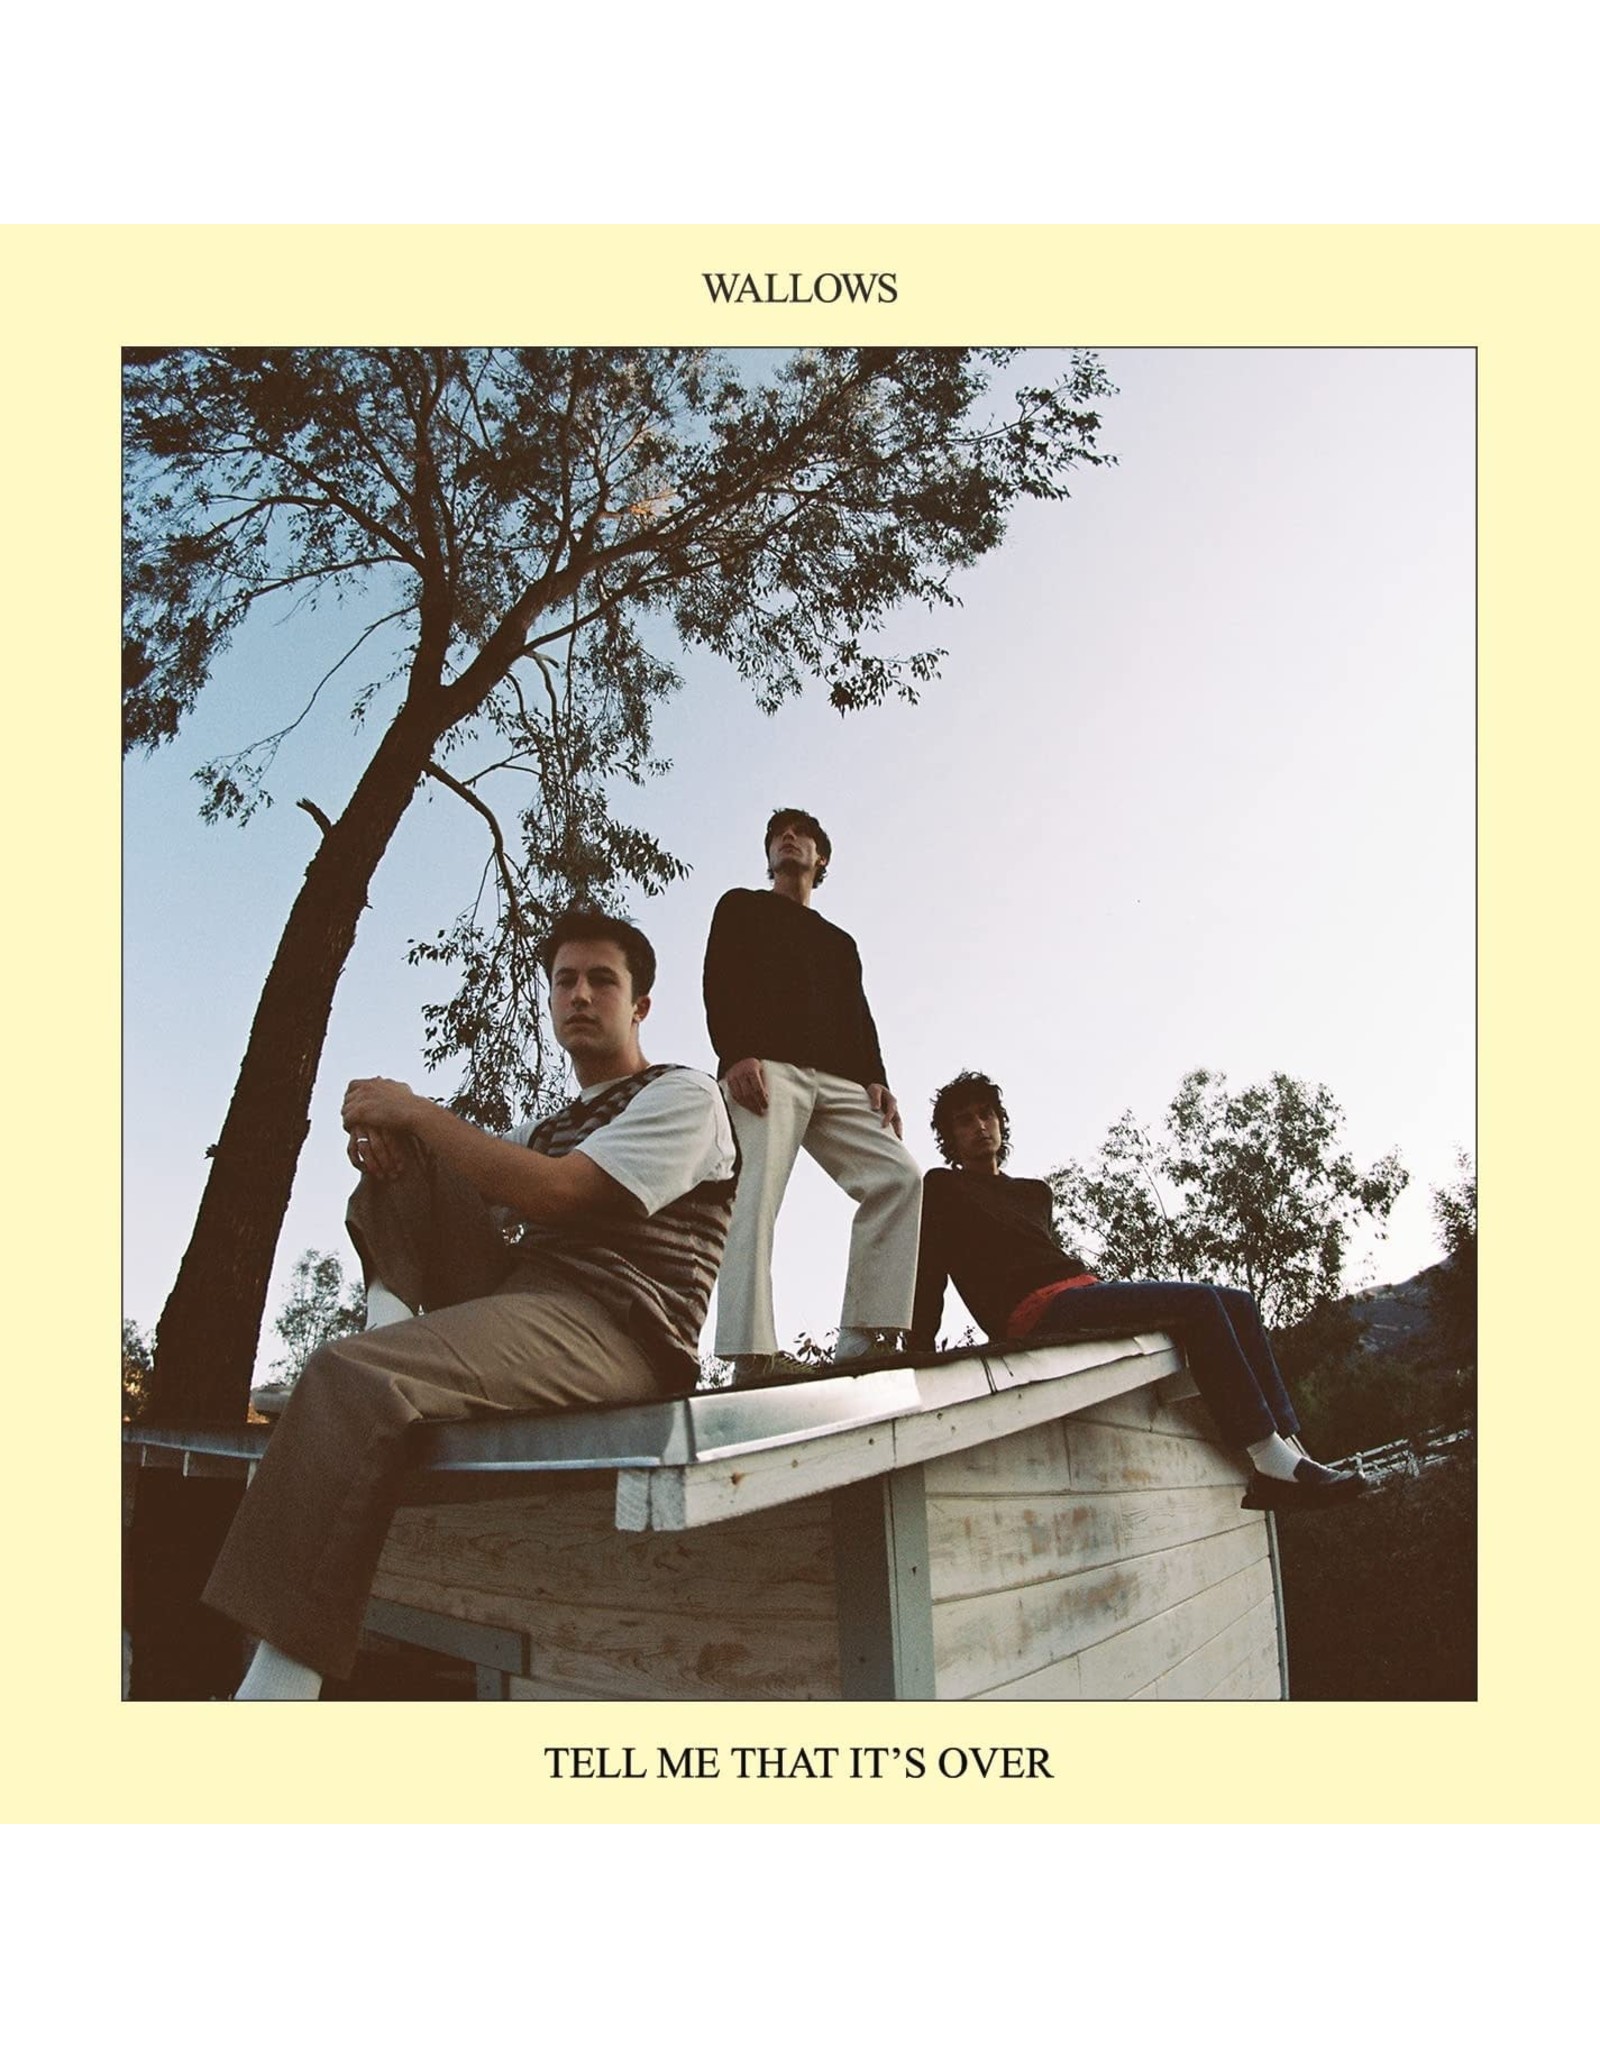 Wallows - Tell Me That It's Over (Yellow Vinyl)